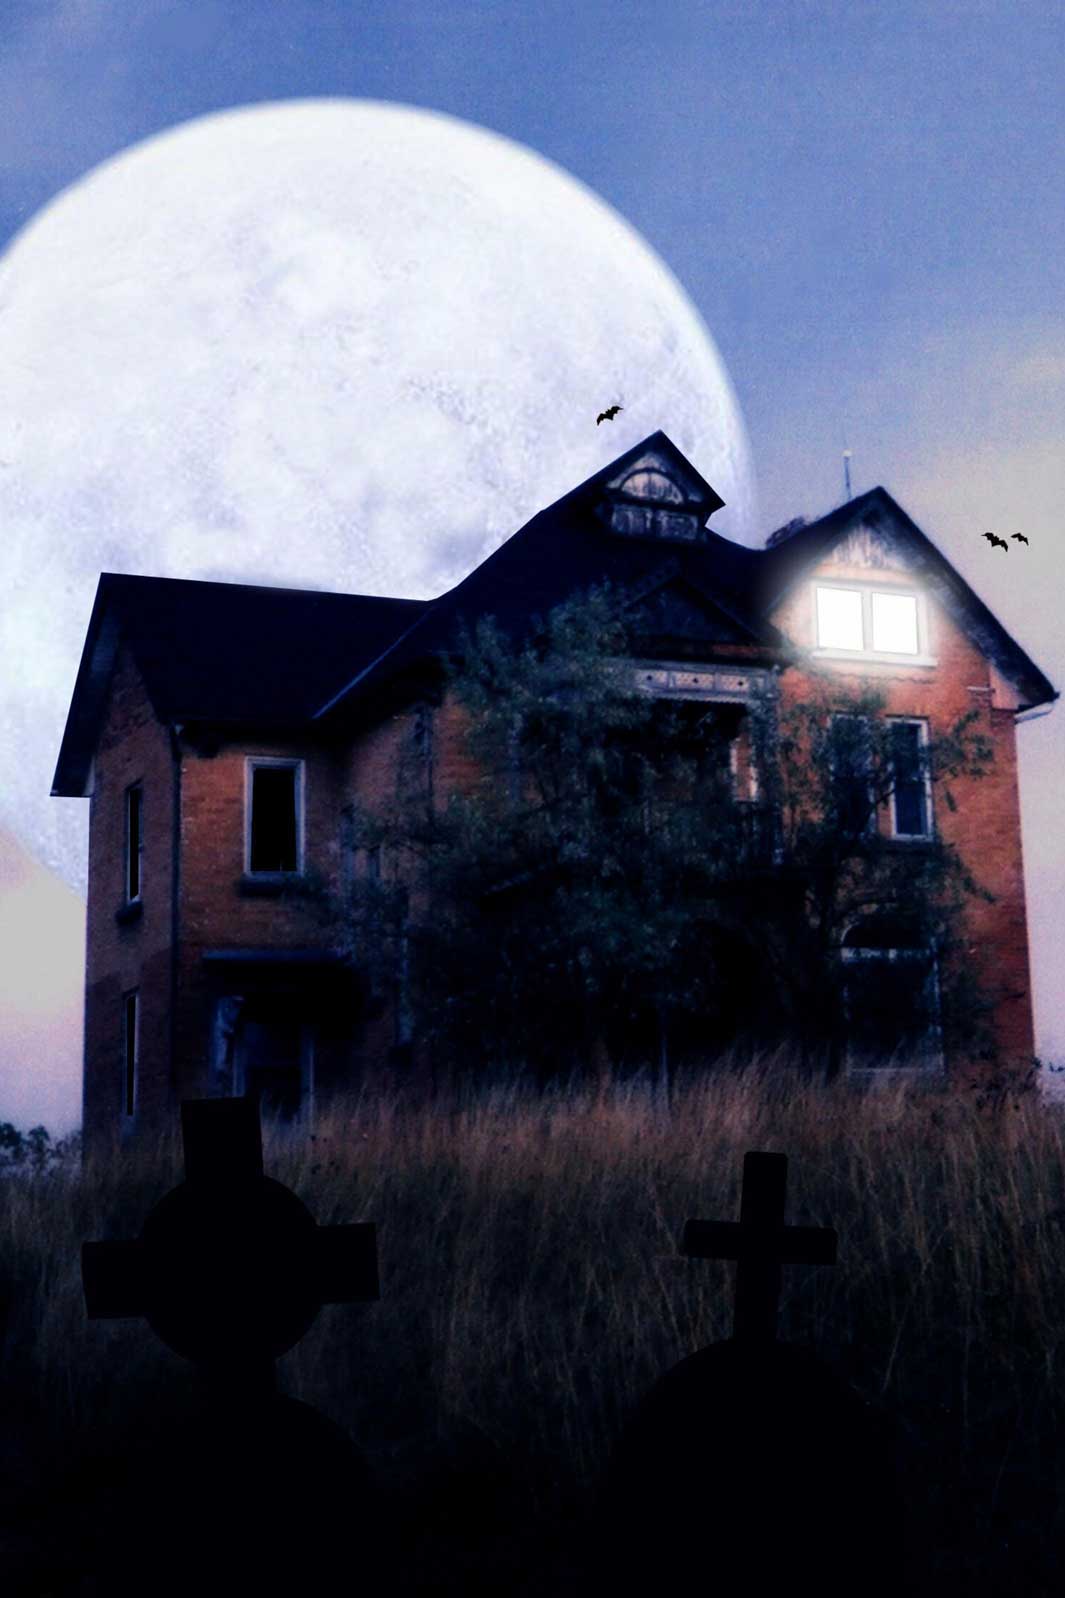 Large moon covering a Victorian house on a haunted hill on all Hallows Eve.